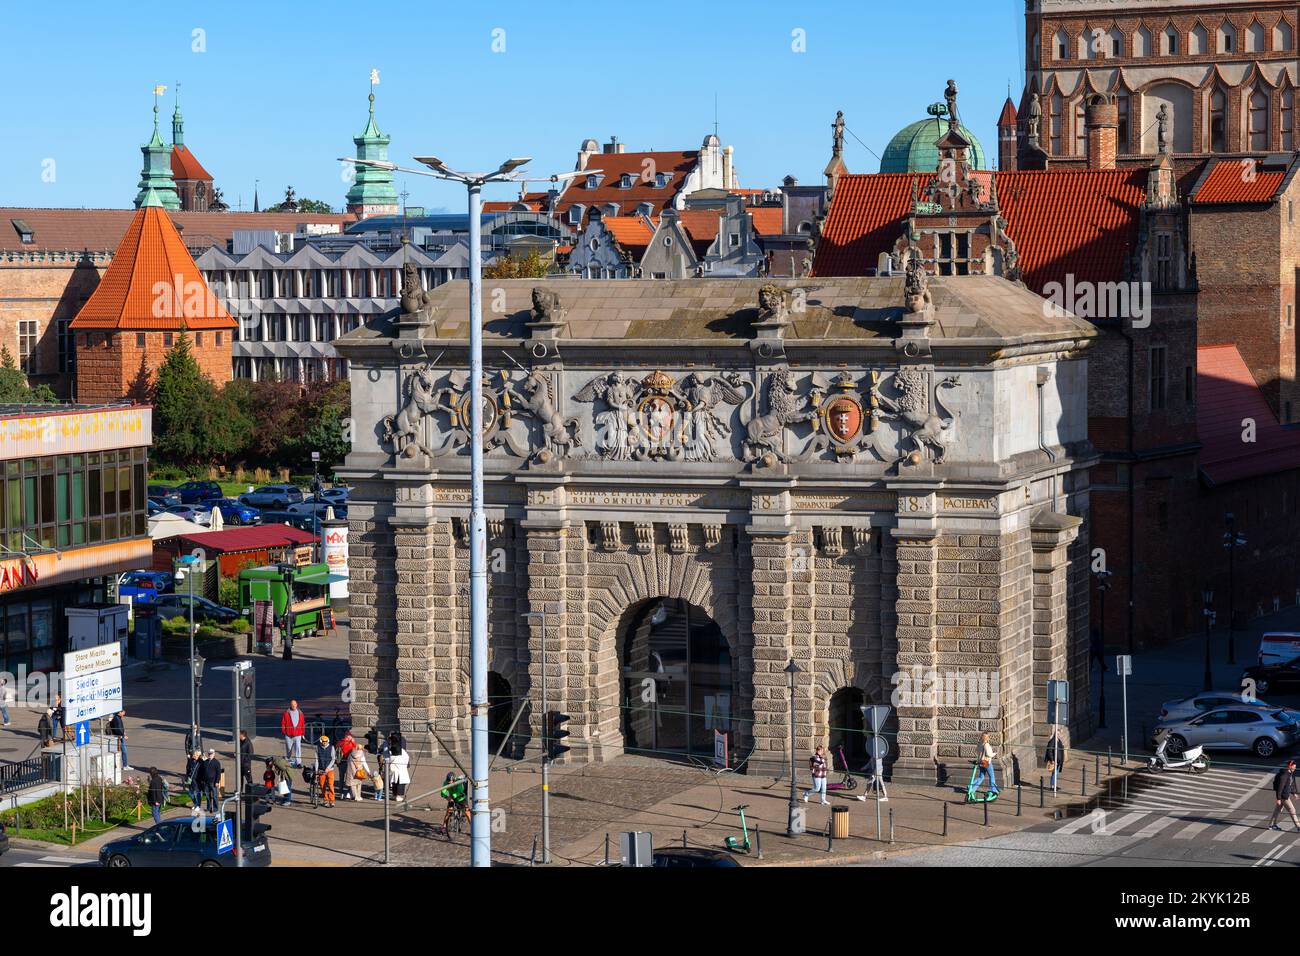 The Highland Gate (Brama Wyżynna), also called the High Gate or the Upland Gate in city of Gdańsk in Poland. 16th century city gate located at the ent Stock Photo